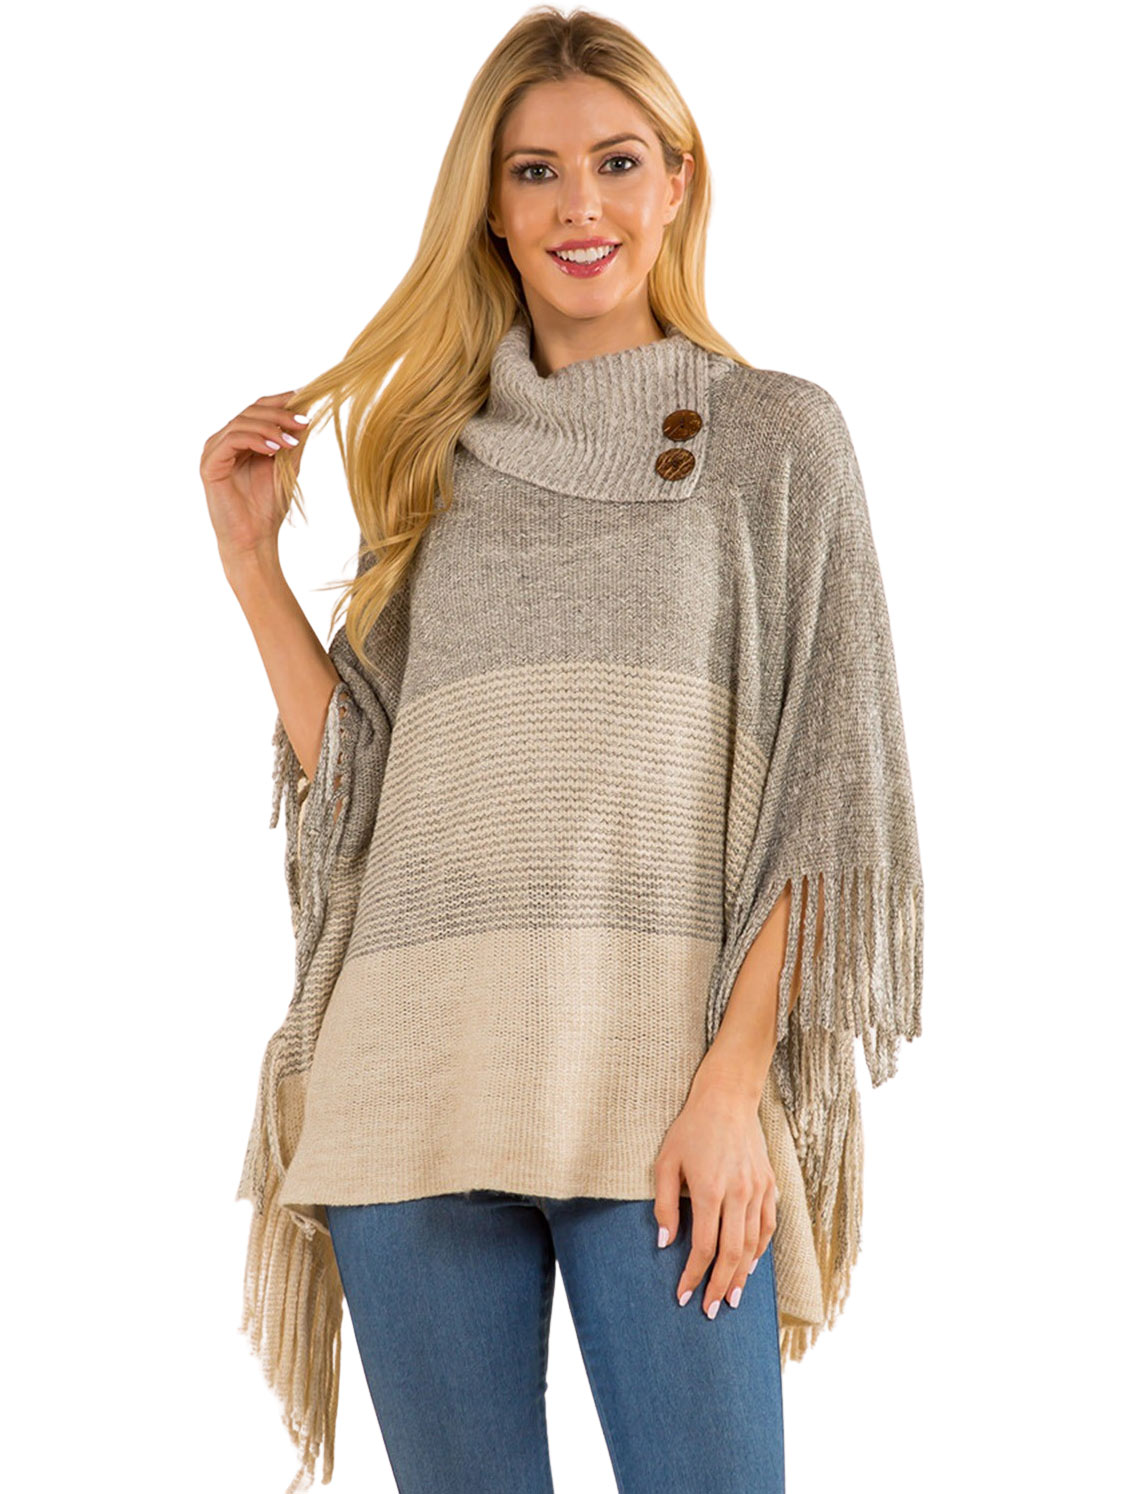 Wholesale4209 - Poncho - Ombre Cowl-neck w/ Wooden Buttons